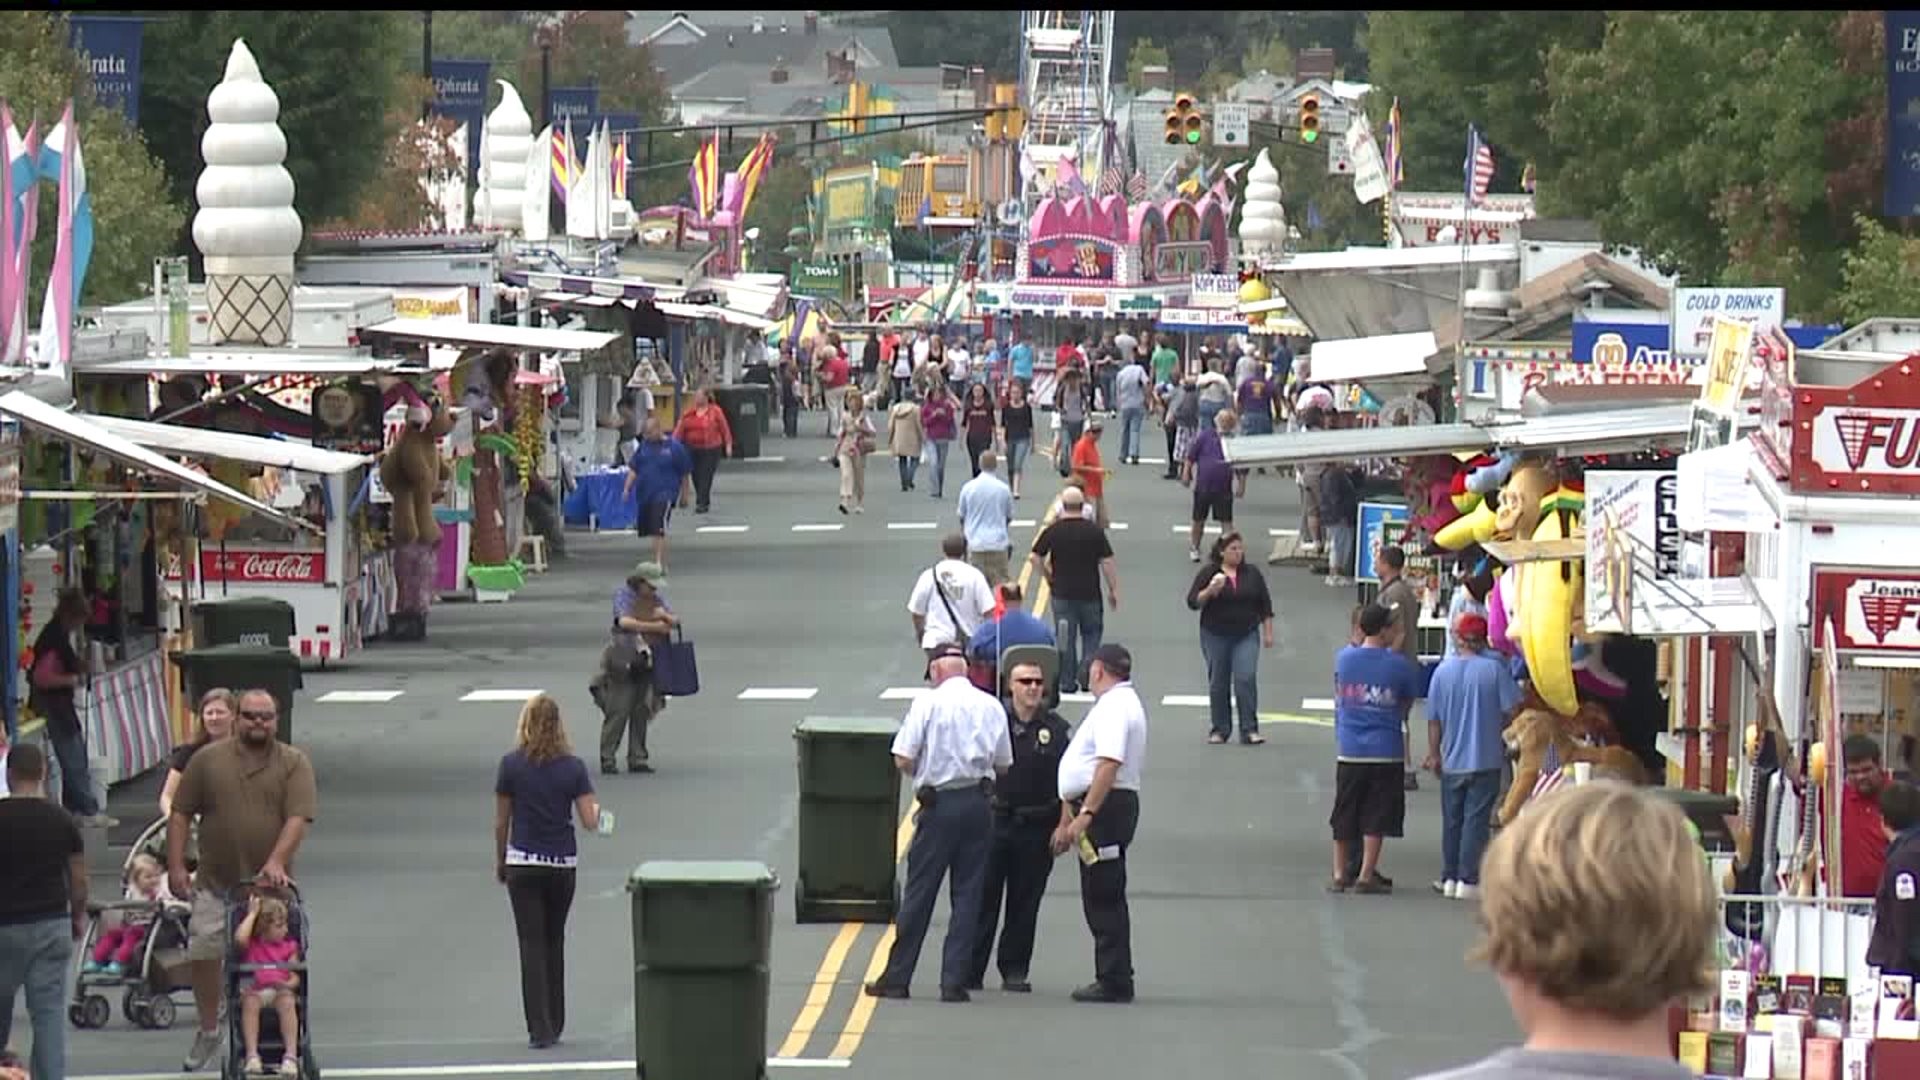 The fair kicked off earlier this week and will end on Saturday.